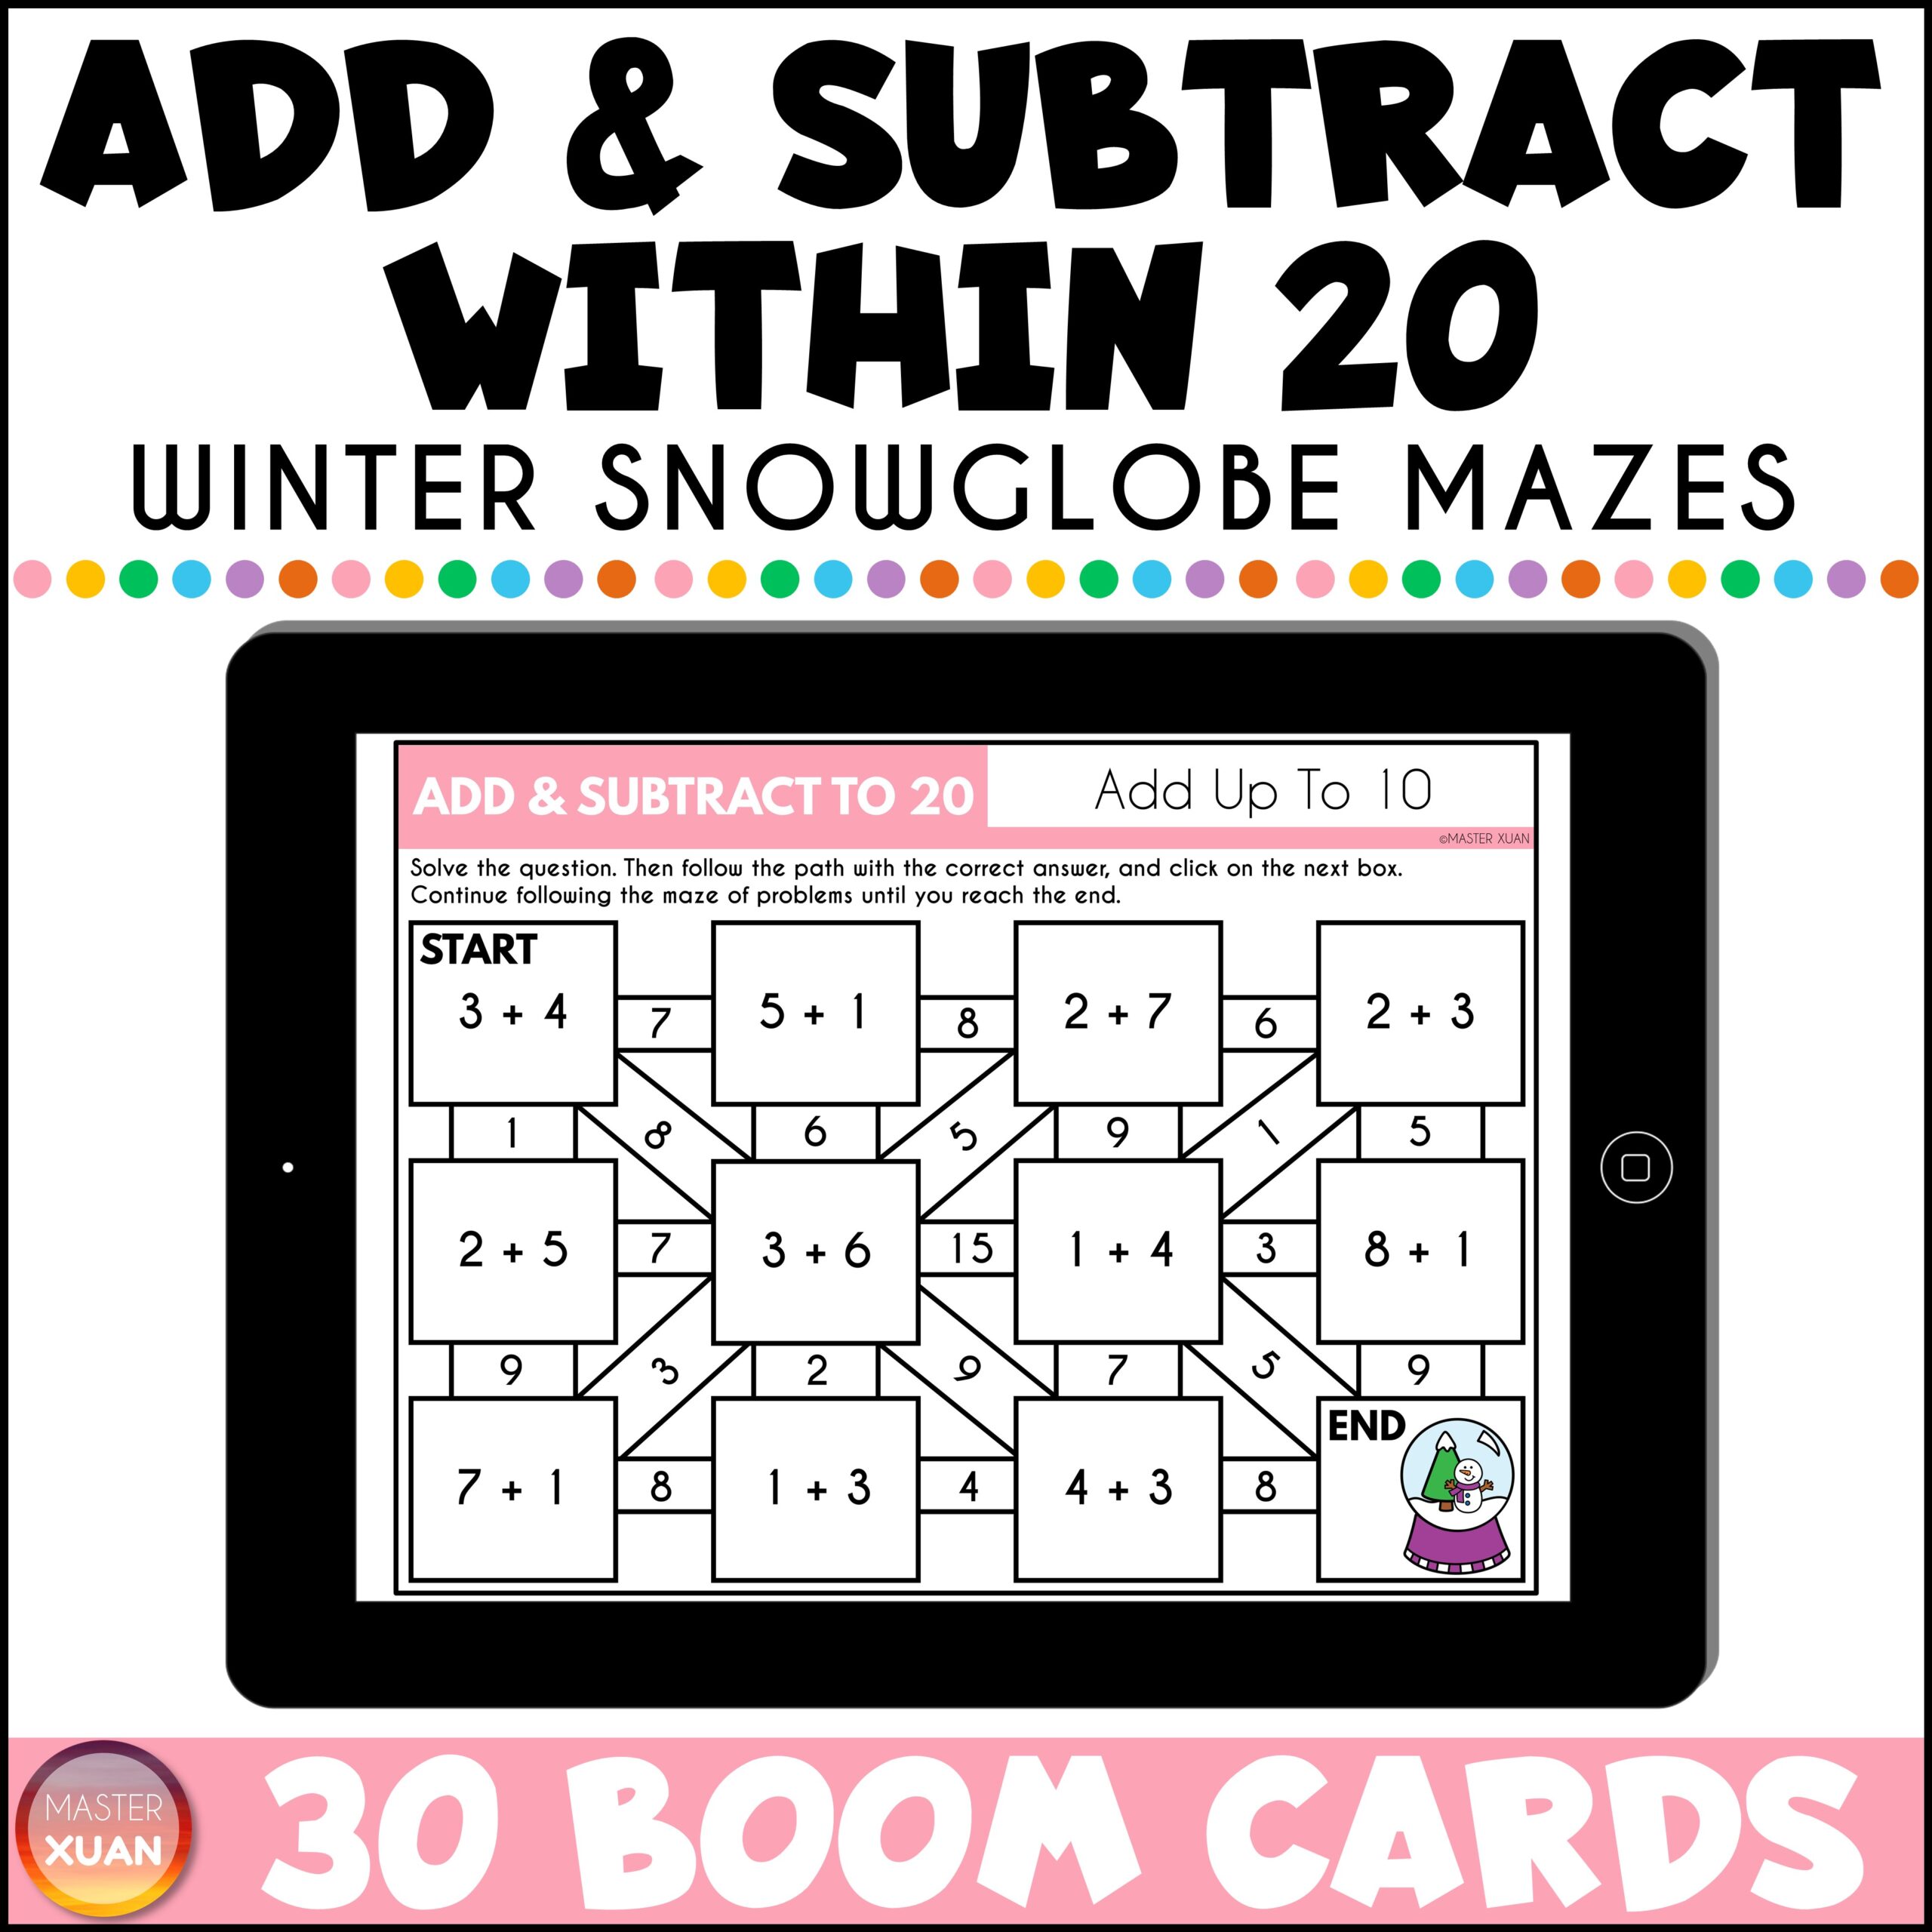 Add and subtract within 20 winter snowglobe mazes has 30 Boom Cards / digital task cards.